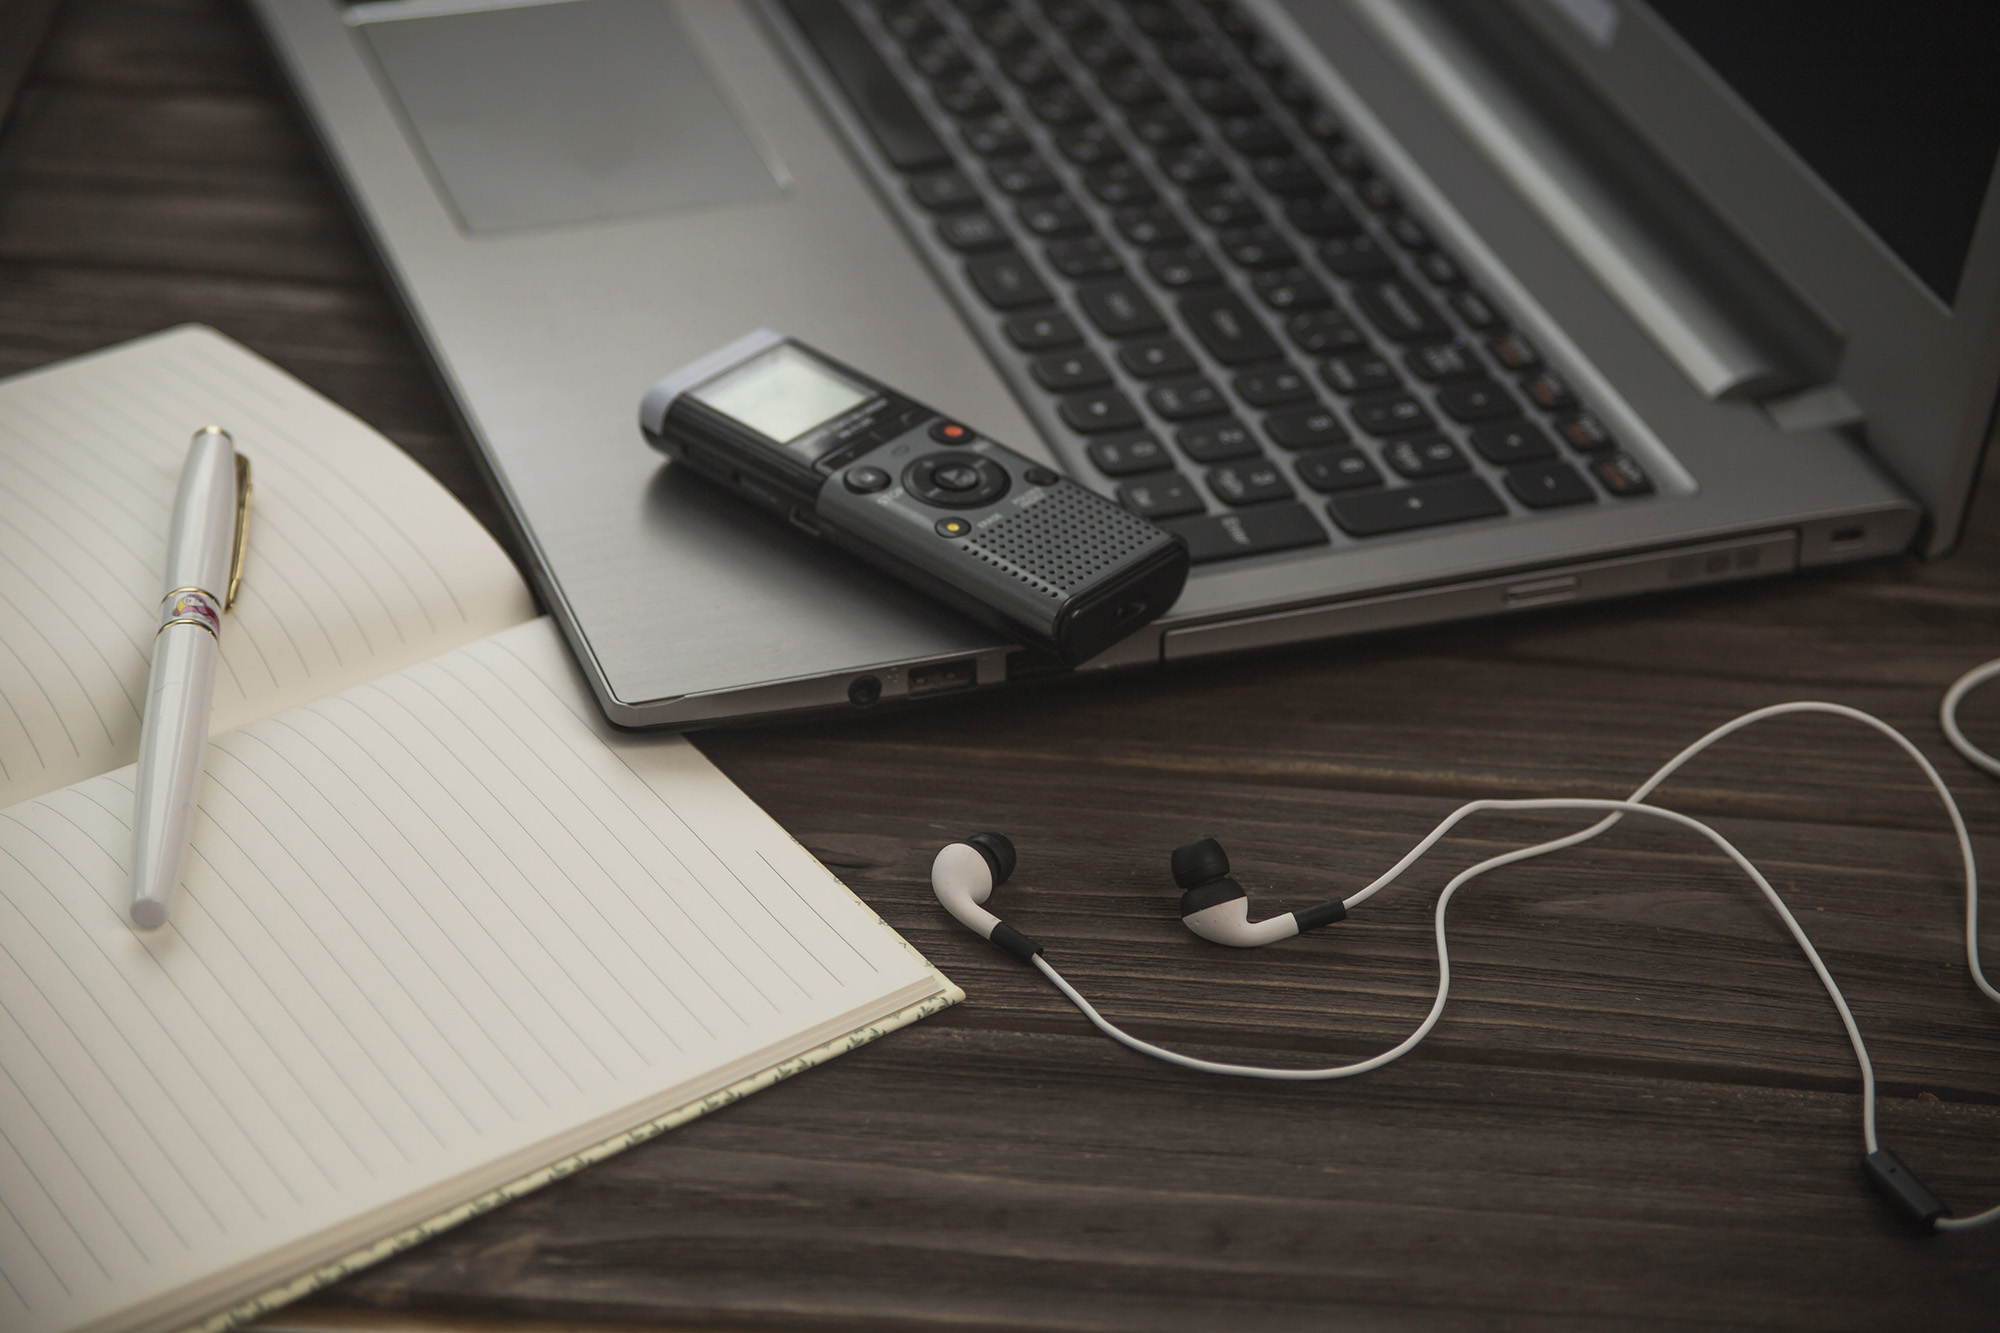 A notebook, pen, laptop, voice recorder and headphones arranged in a stock photo demonstrating the tools of a journalist.